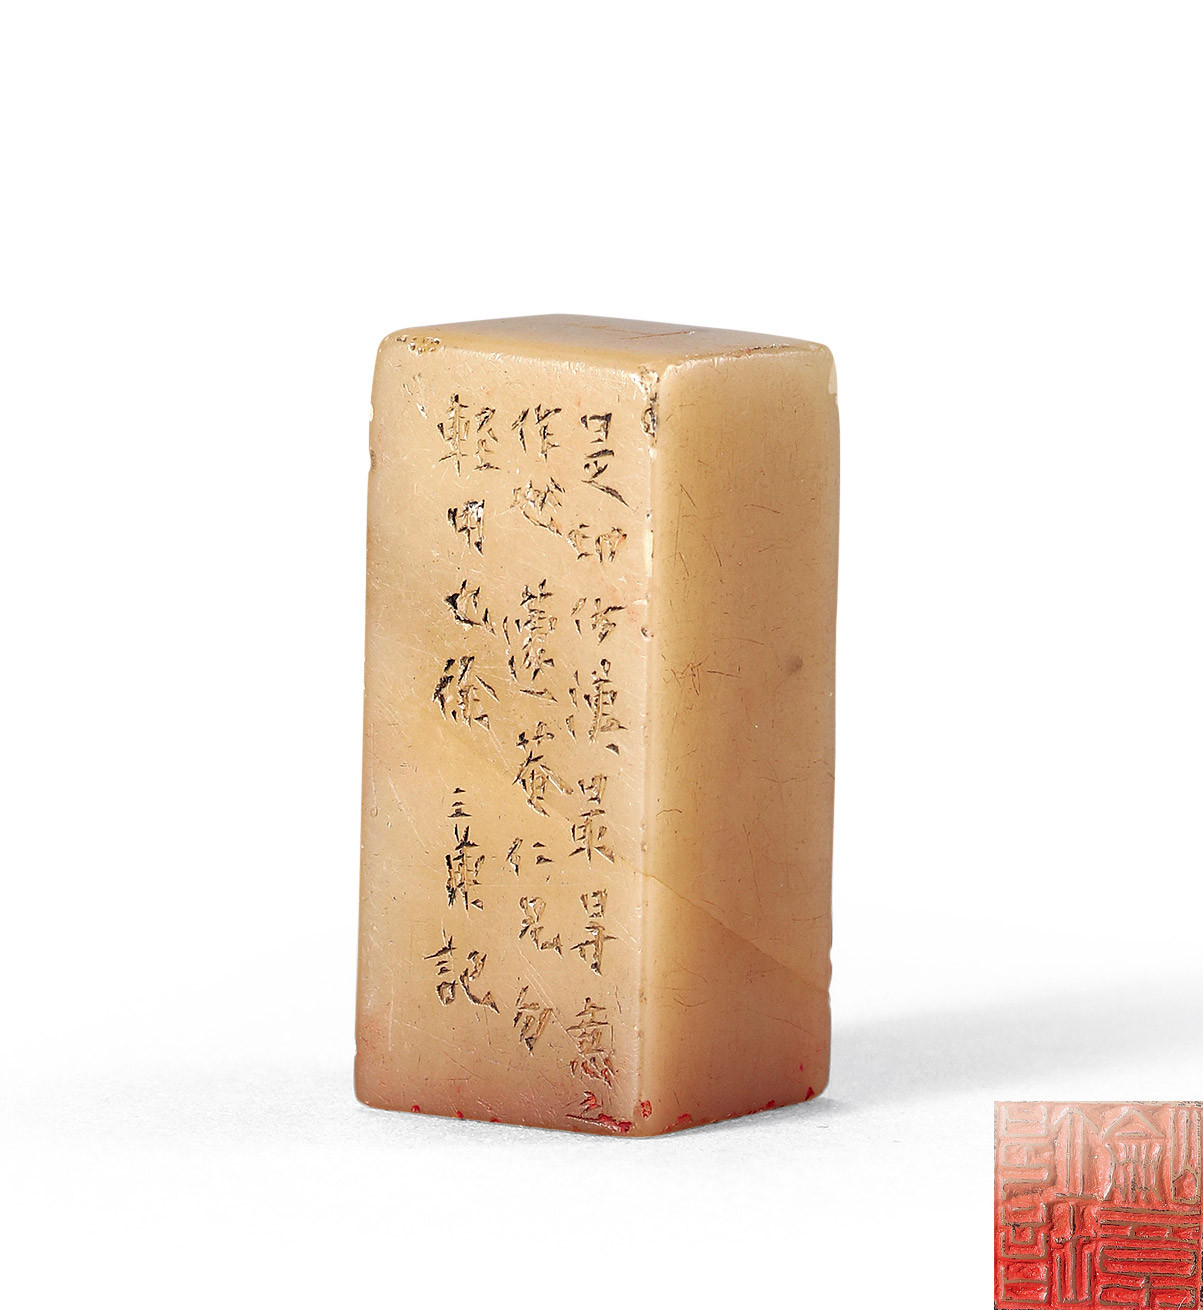 SHOUSHAN STONE CARVED SQUARE SEAL BY XU SAN’GENG